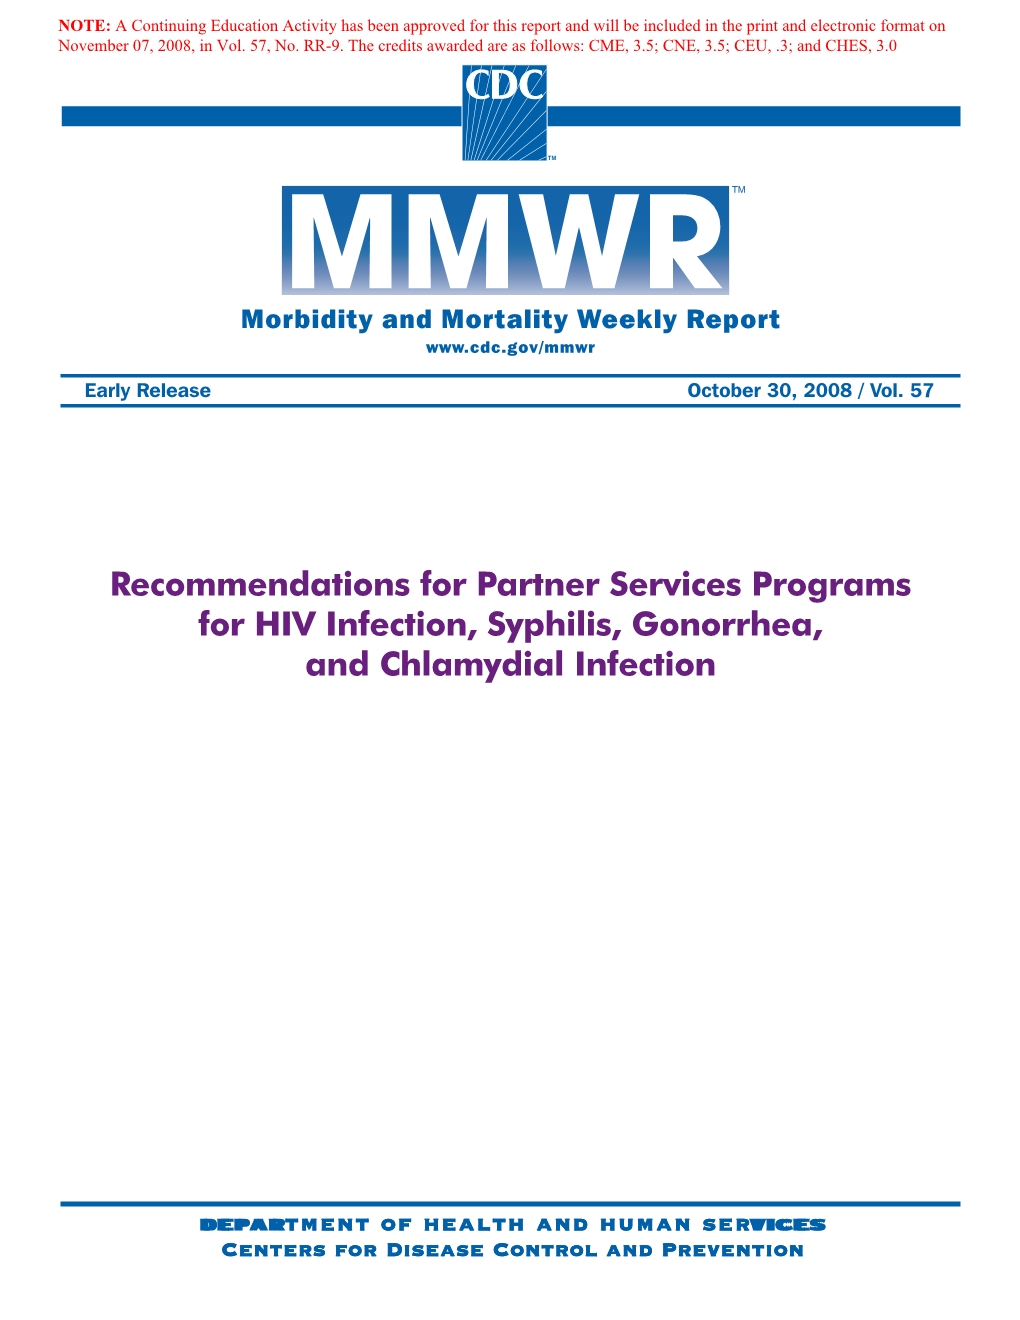 Recommendations for Partner Services Programs for HIV Infection, Syphilis, Gonorrhea, and Chlamydial Infection